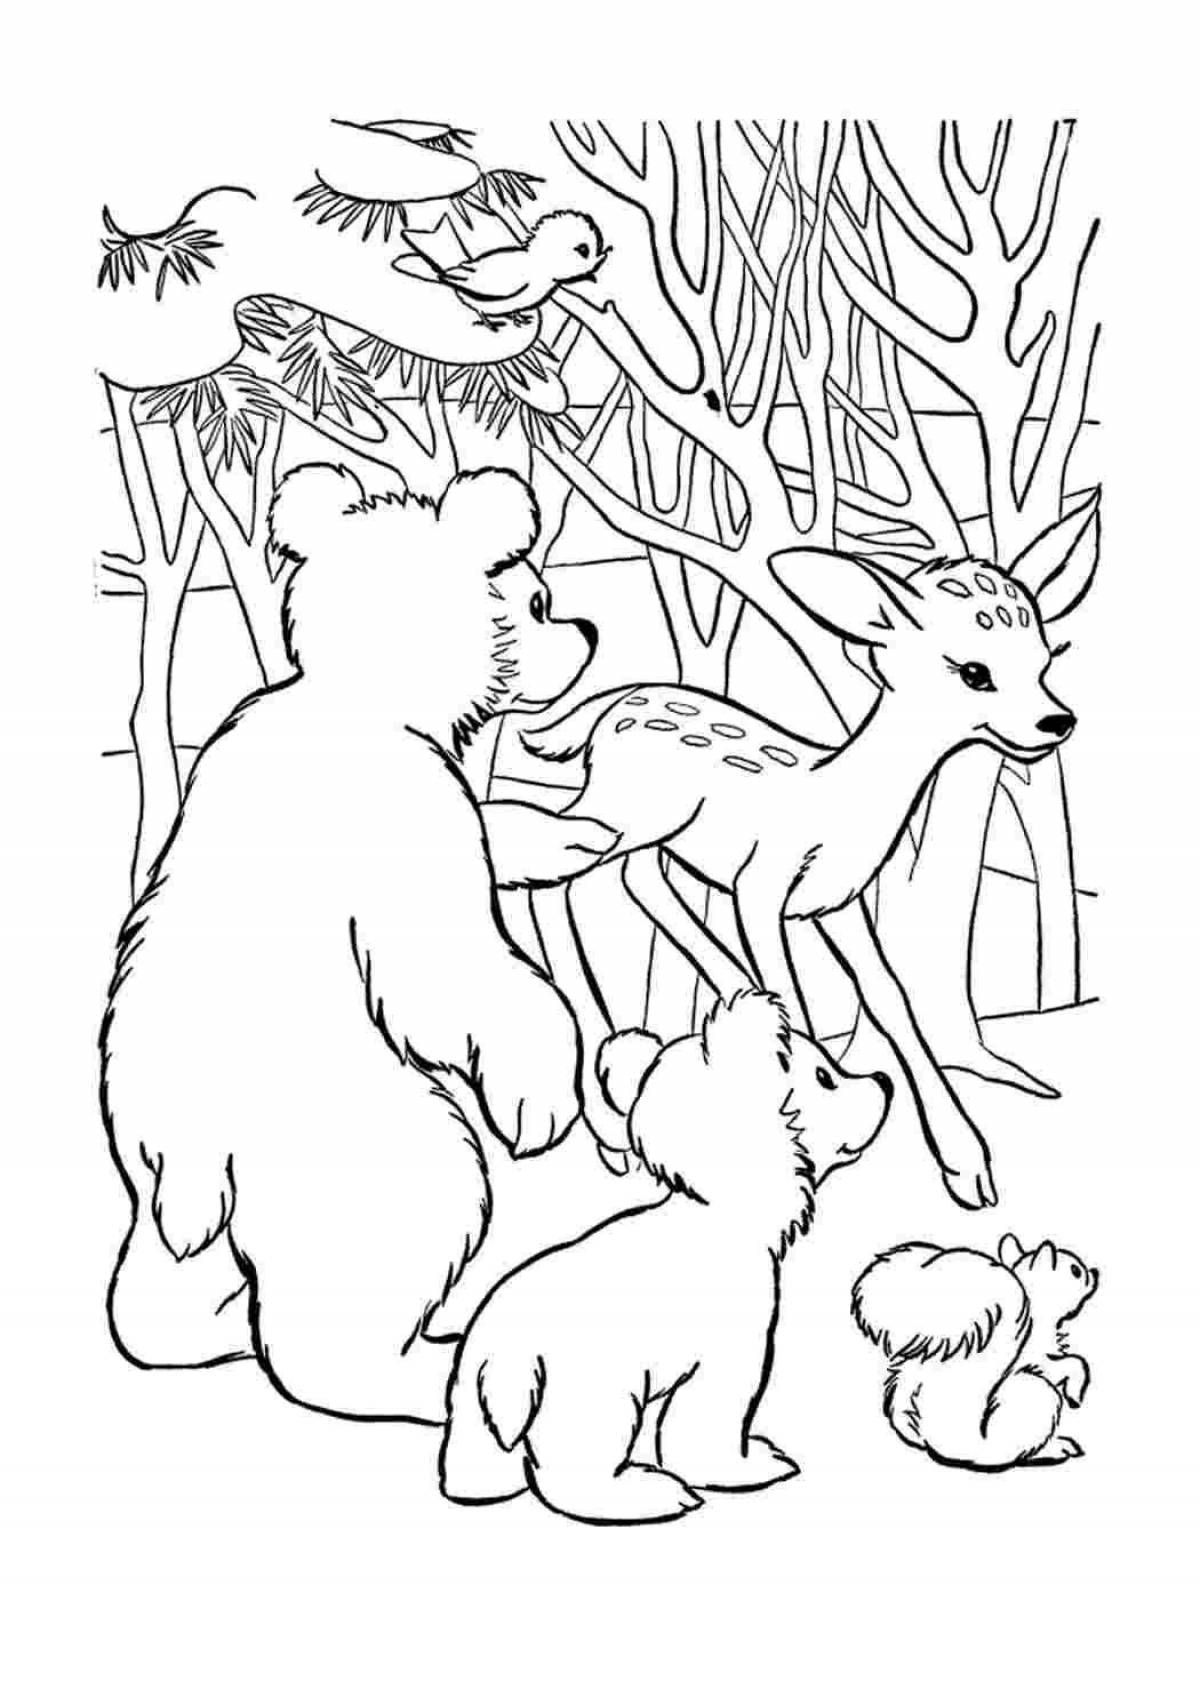 Colorful vibrant forest animals coloring page for 5-6 year olds